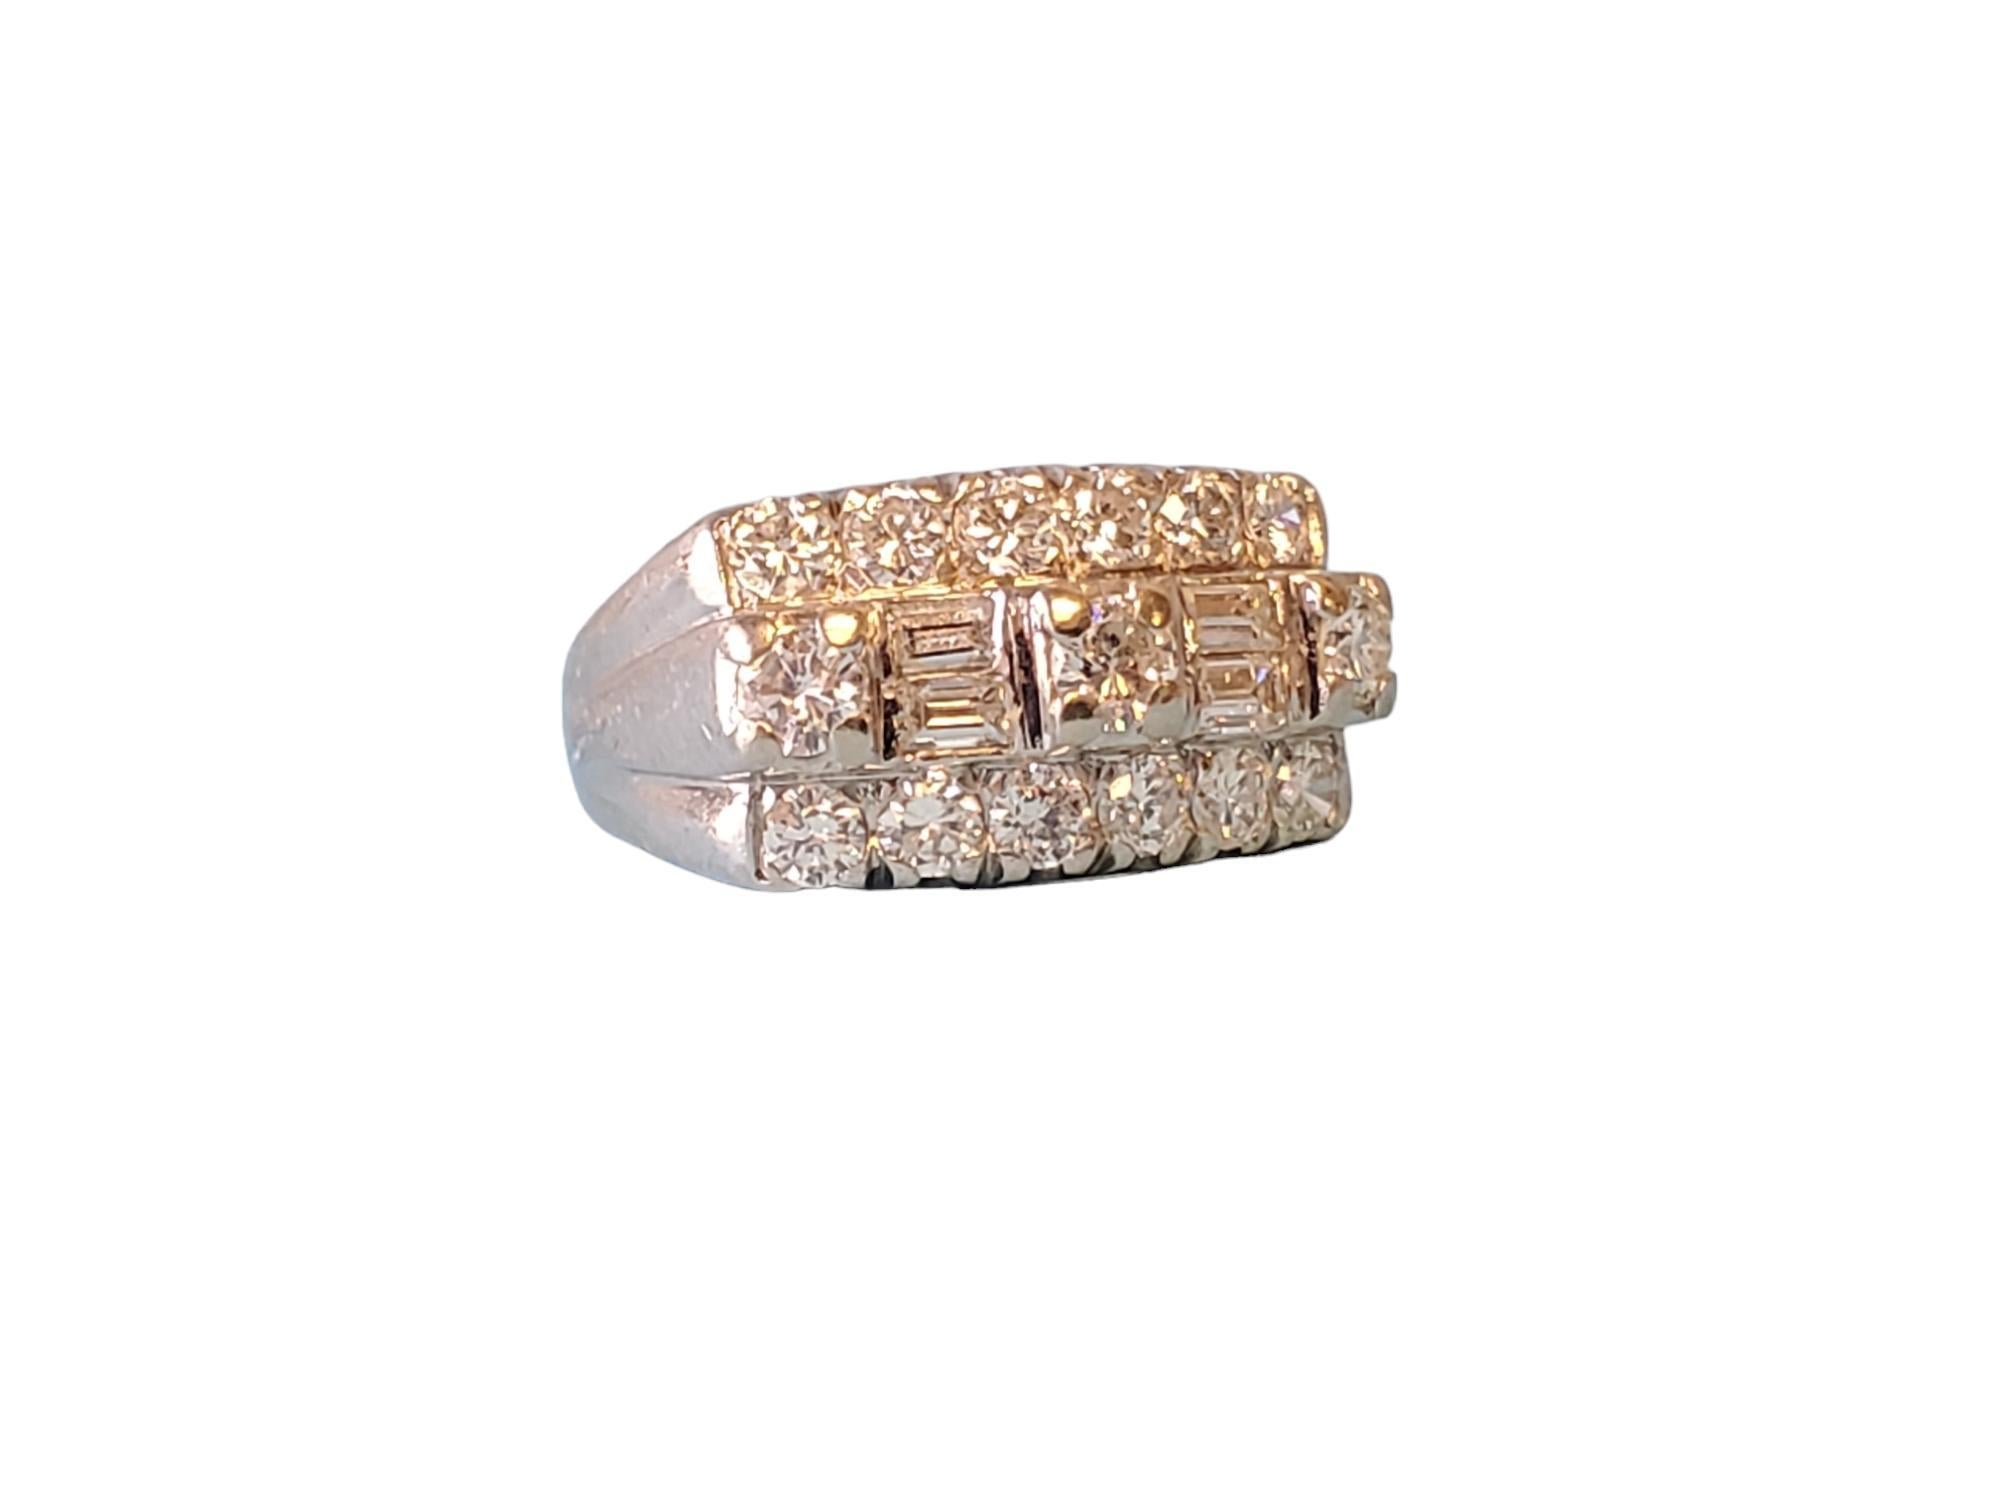 Vintage 14k 1.36ct Diamond Ring G VS-SI1 Diamonds

Listed is a fantastic vintage 14k white gold diamond band with a big look. The diamonds featured in this ring are excellent quality G VS-SI1 white brilliant scintillating natural stones. The ring